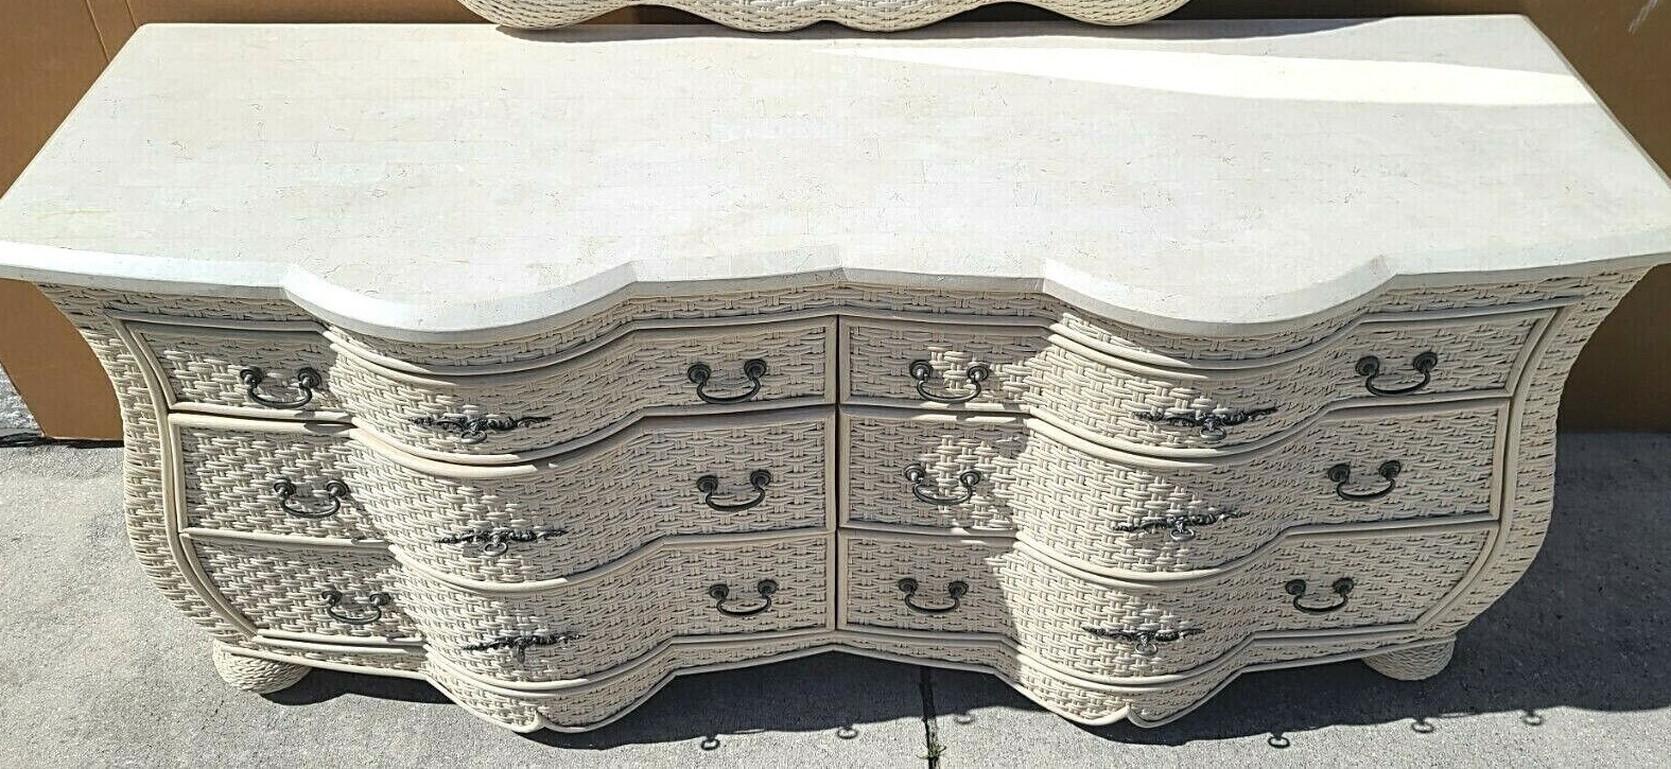 Offering One Of Our Recent Palm Beach Estate Fine Furniture Acquisitions Of A 
Sculptural French Wicker & Tessellated Stone Top 6 Drawer Dresser

Approximate Measurements in Inches
Dresser: 30